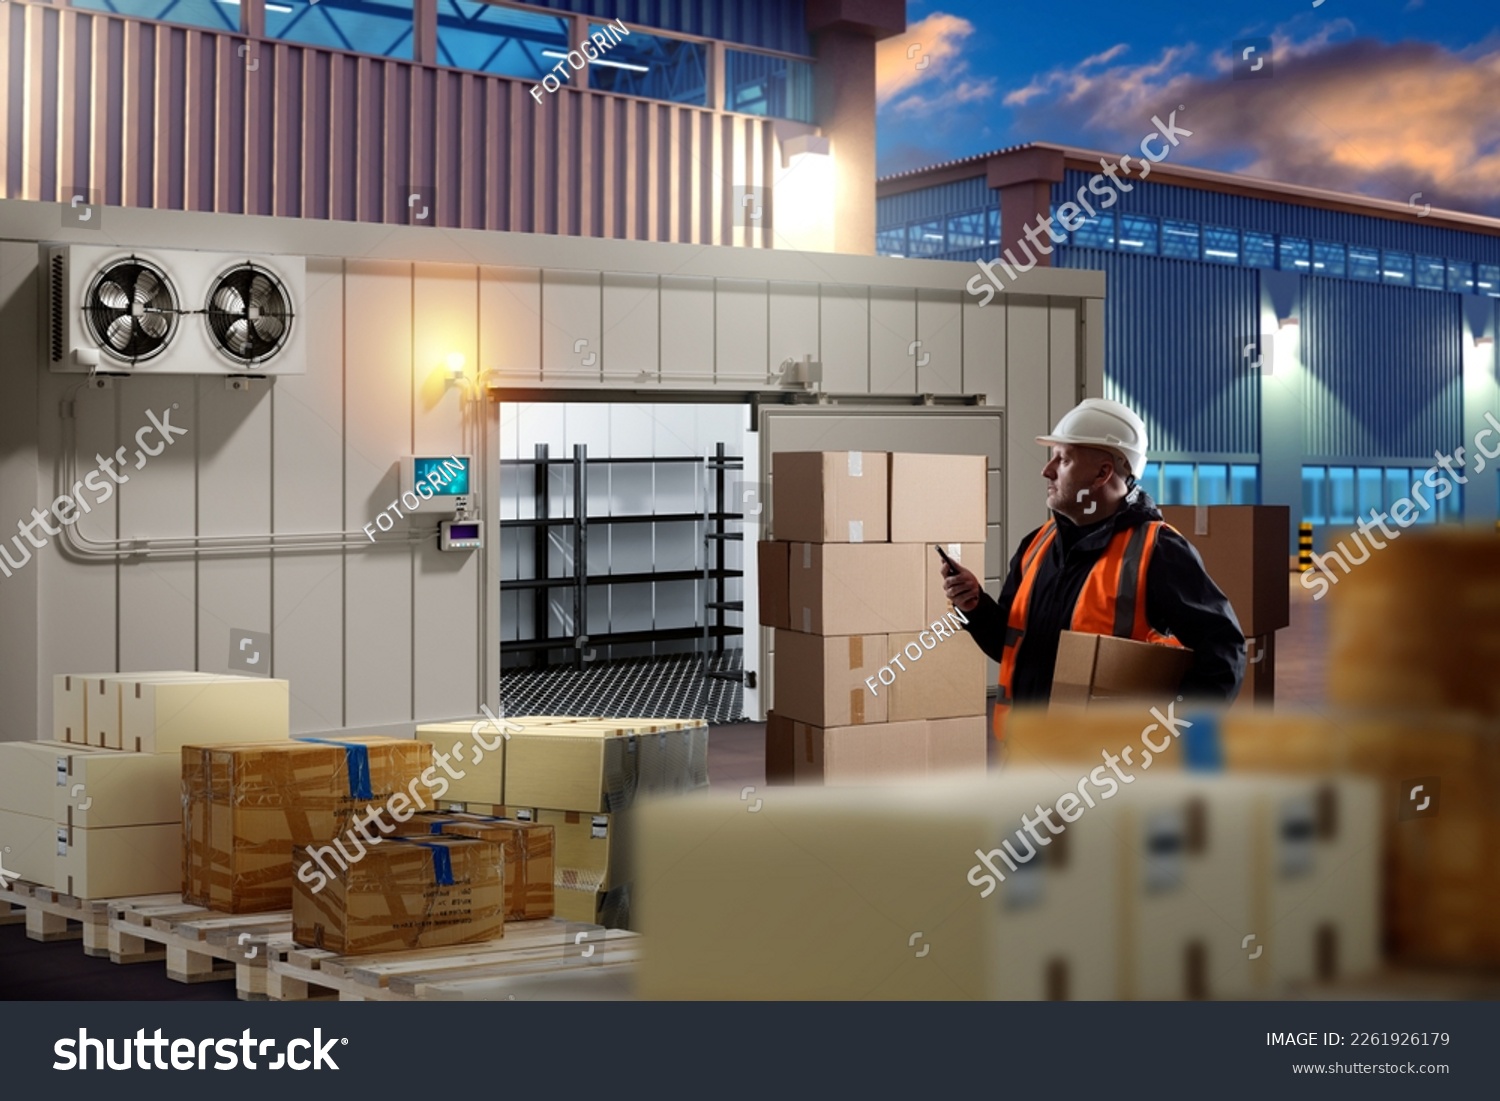 Man near industrial refrigerator. Boxes on pallets near cold room. Guy brings boxes into cold room. Cold rooms in industrial zone. Outdoor freezer for storage. Man storekeeper working in evening #2261926179